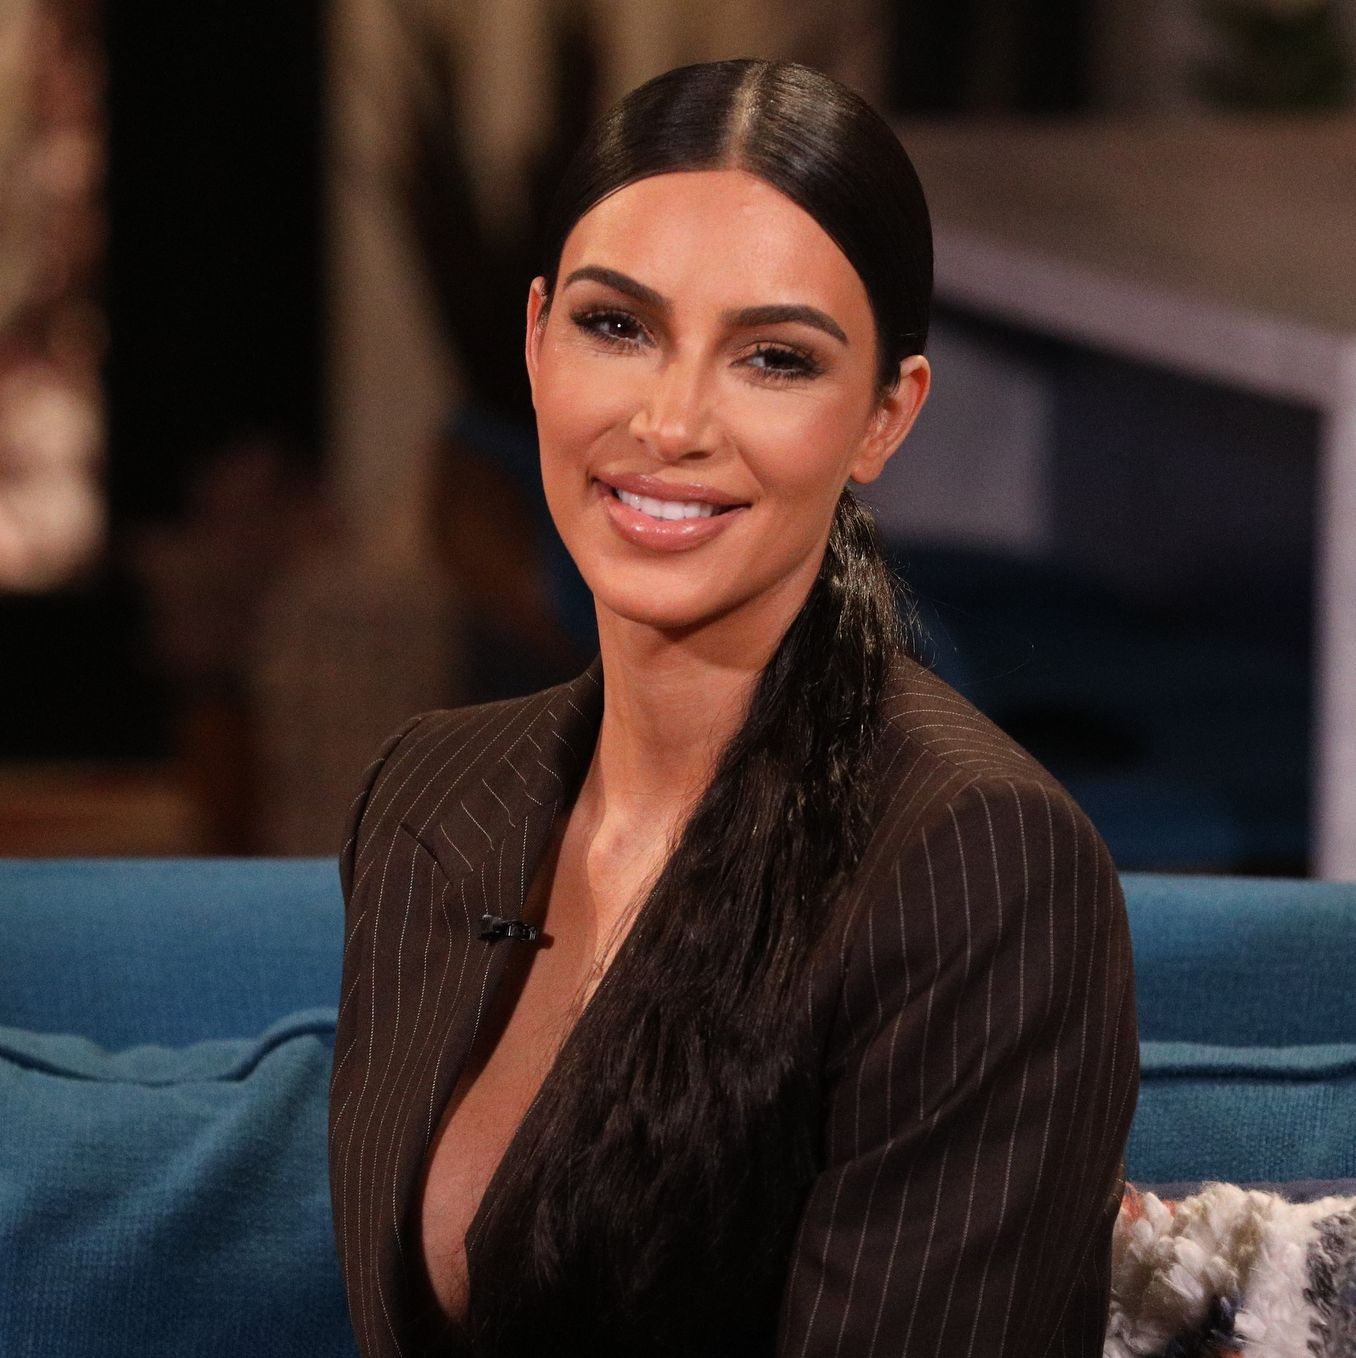 Twitter Is Pissed at Kim Kardashian for Posting 'Spider-Man: No Way Home' Spoilers with Zero Warning